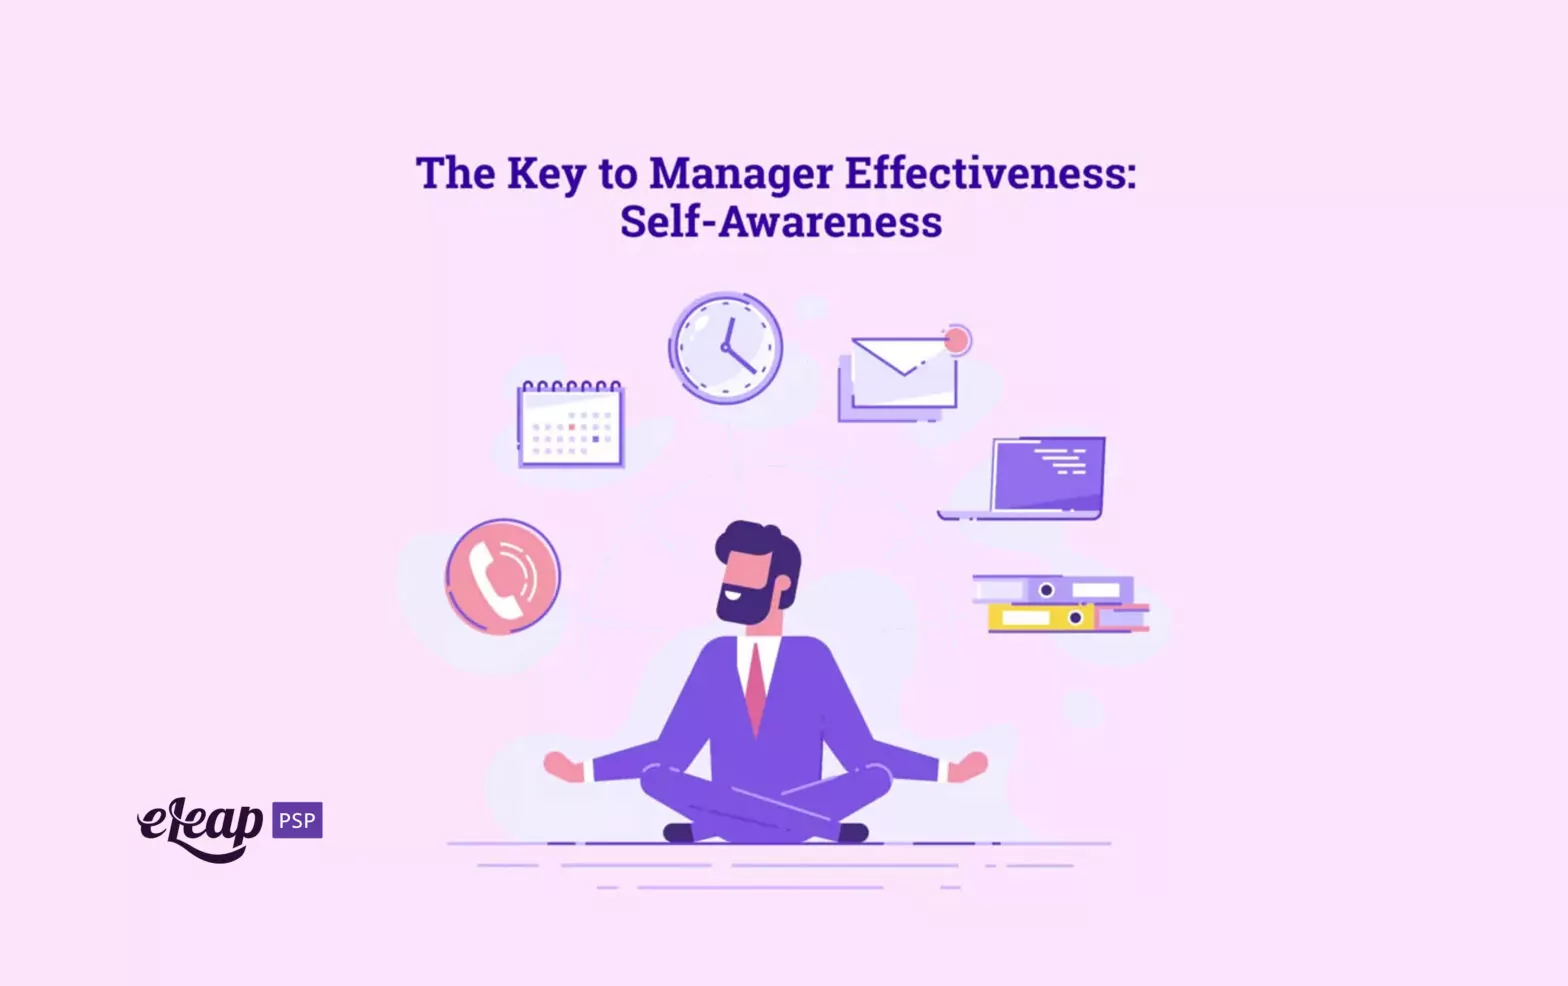 The Key to Manager Effectiveness: Self-Awareness